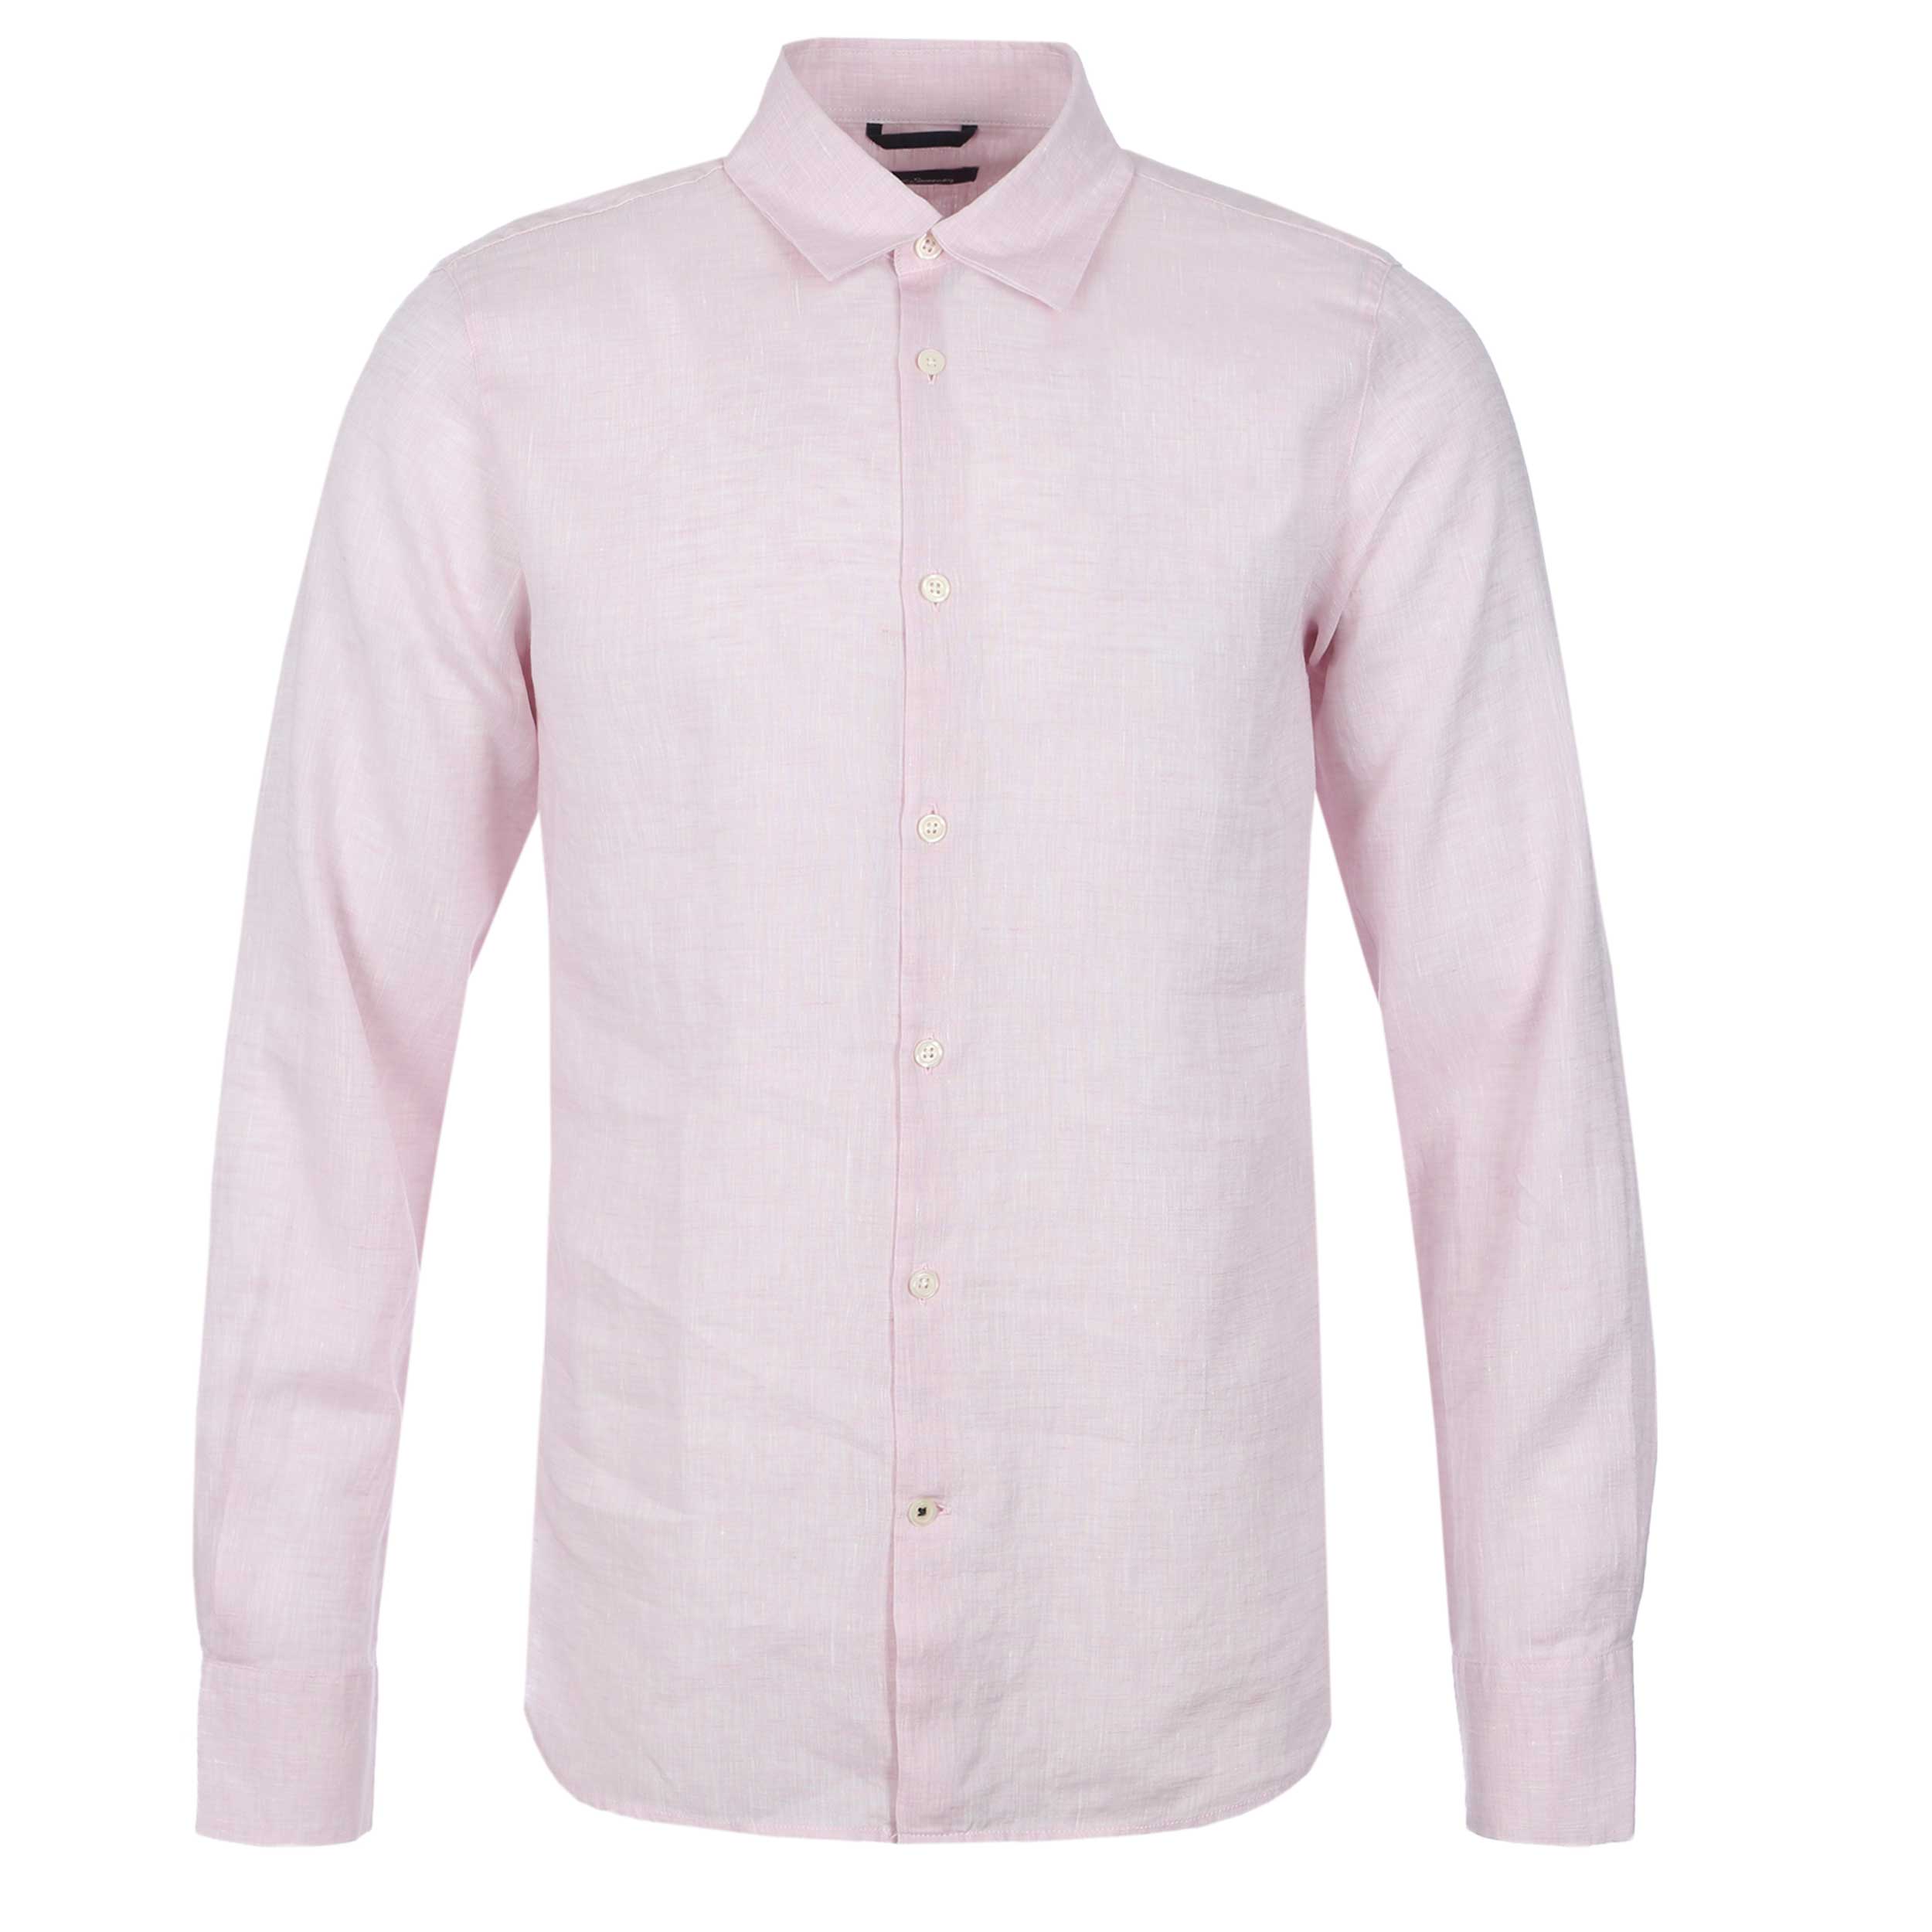 Oliver Sweeney Hawkesworth Shirt in Pink